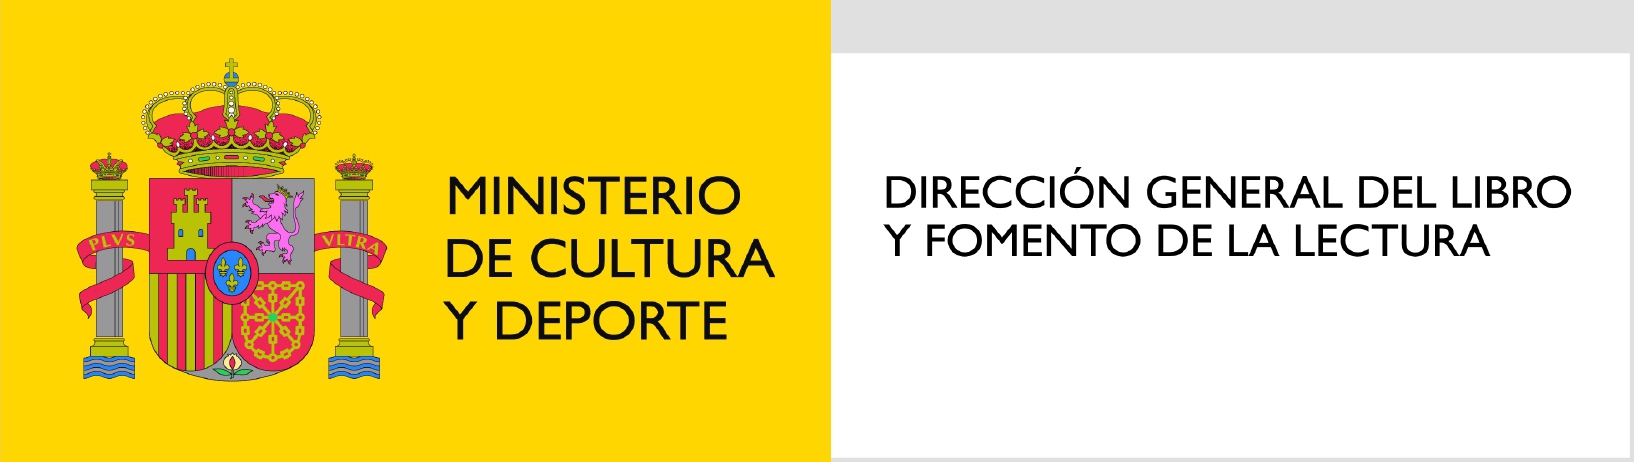 logo ministerio dglfl page 0001 1